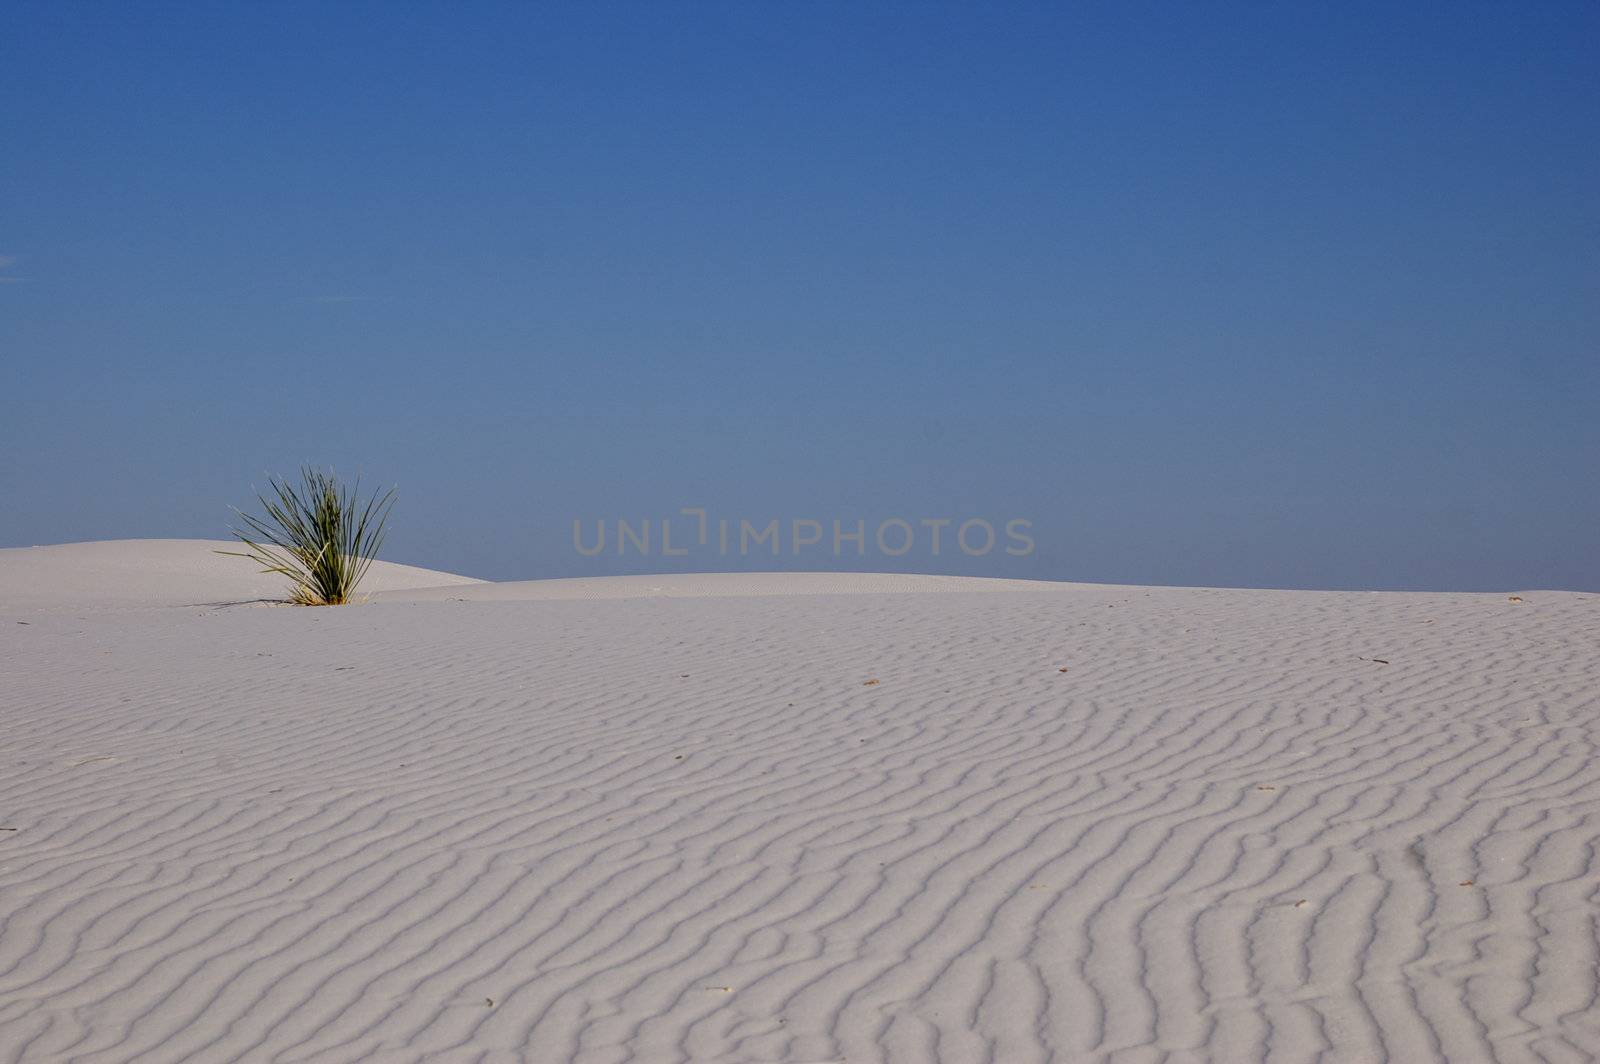 Landscape across a rippled white sand dune to a deep blue cloudless sky, featuring a single desert plant to the side.